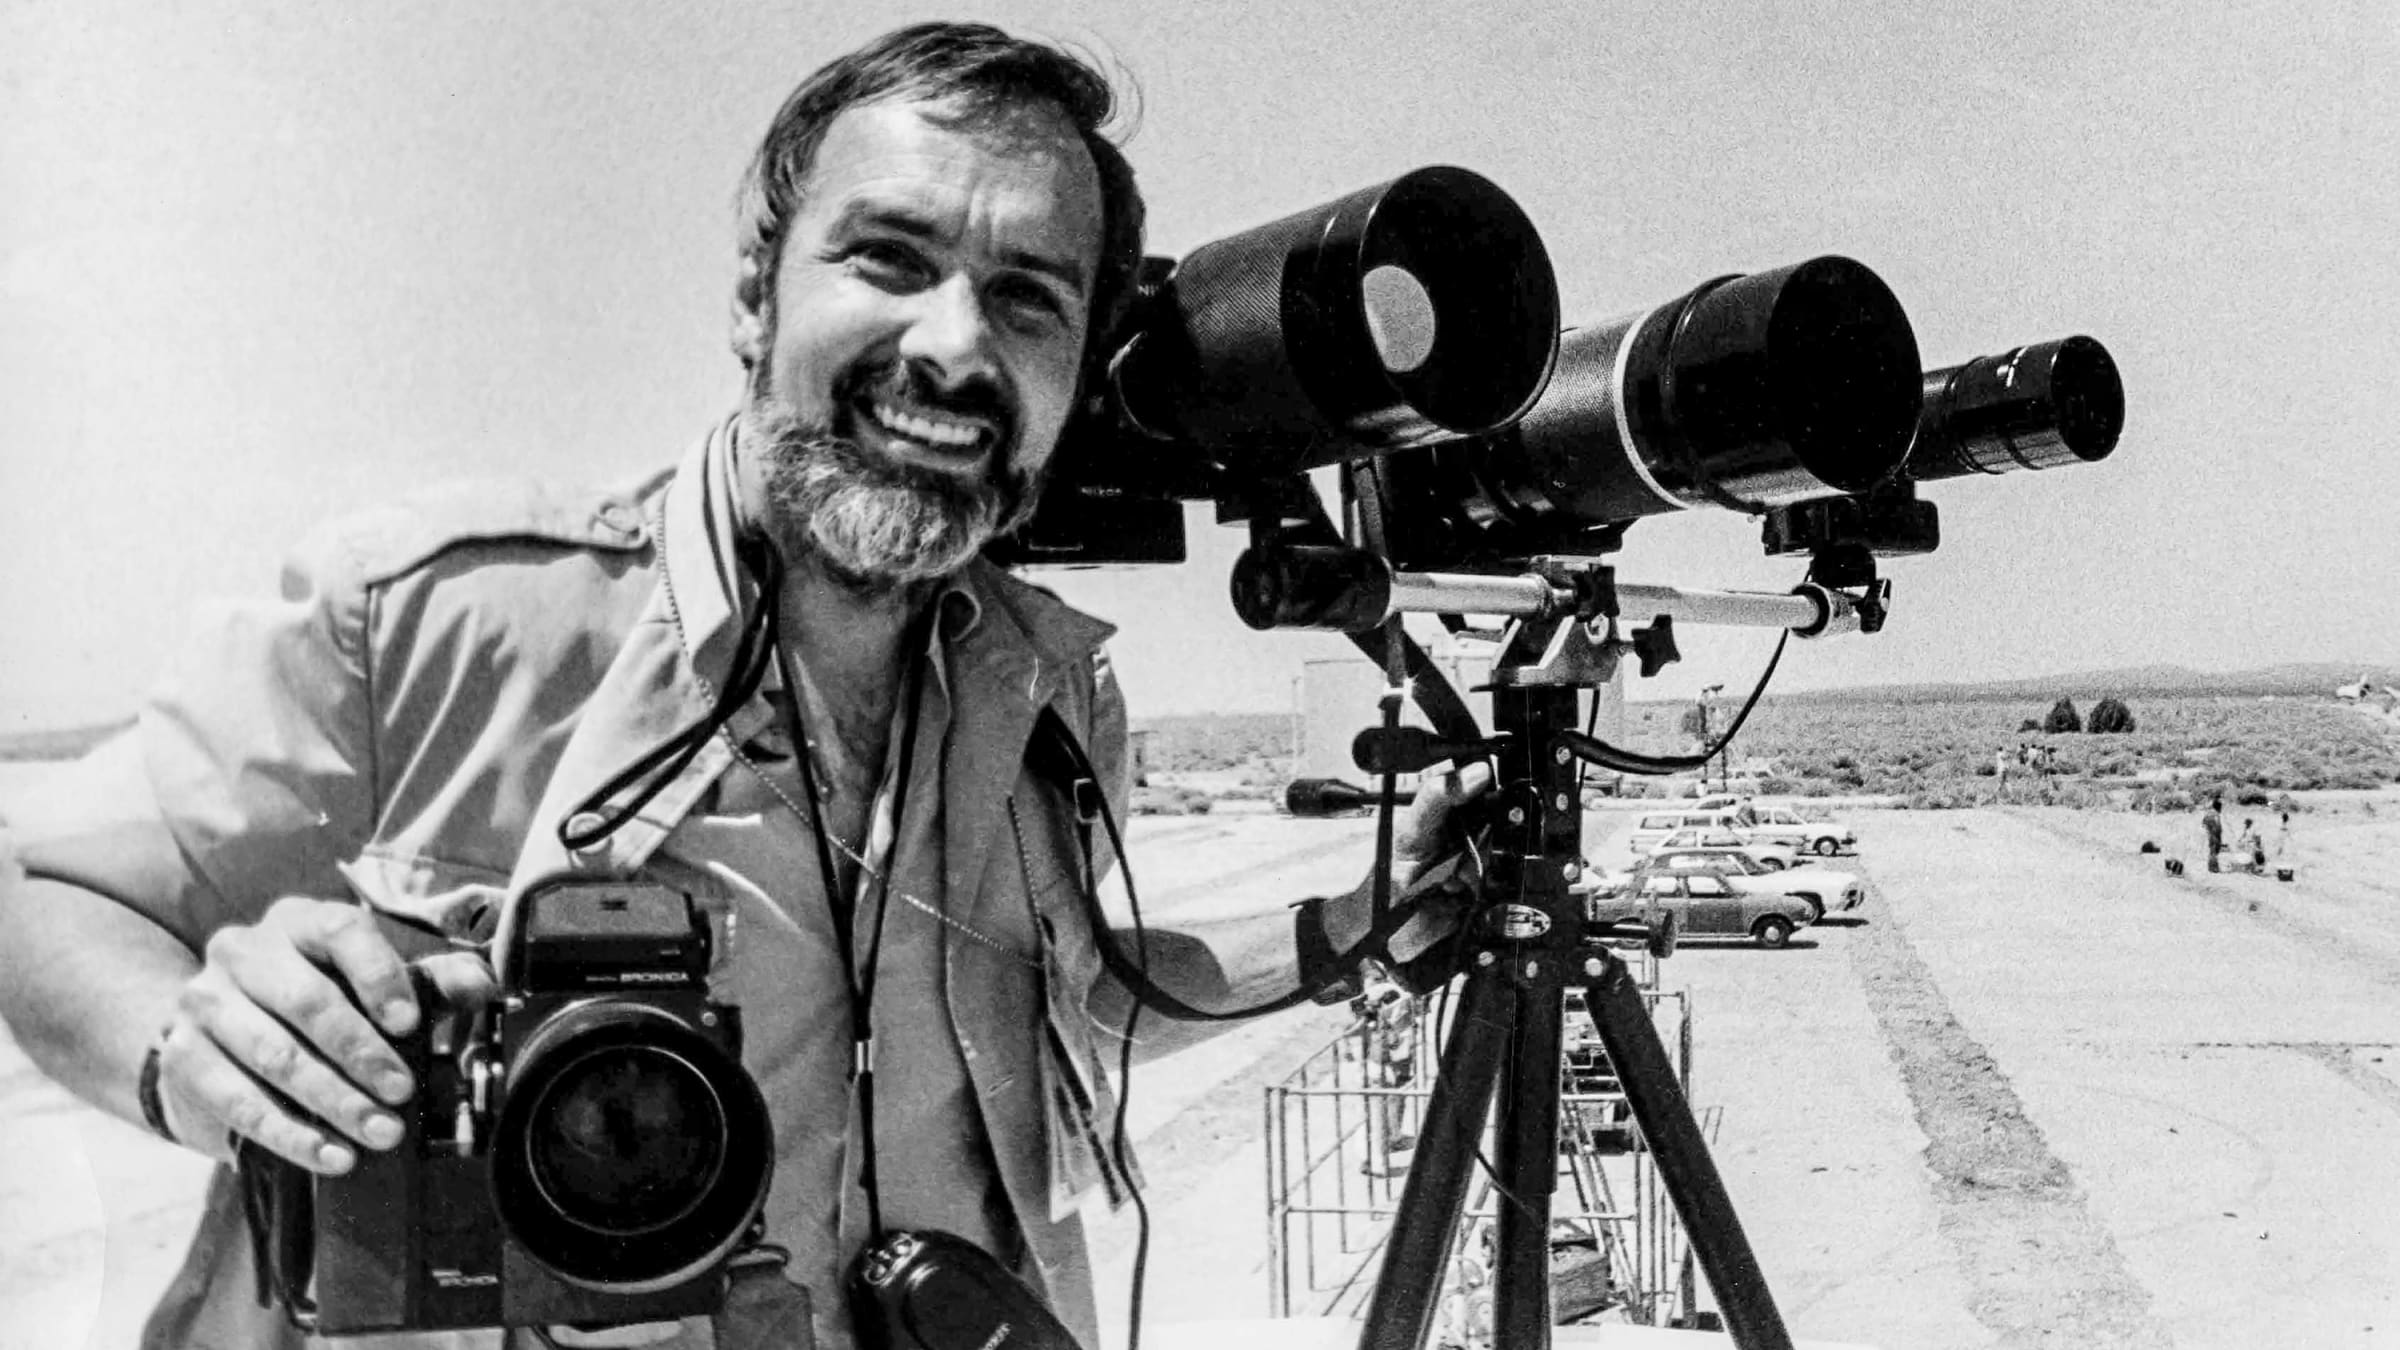 A Lost Camera Case Opens Memories of a Photojournalists Life